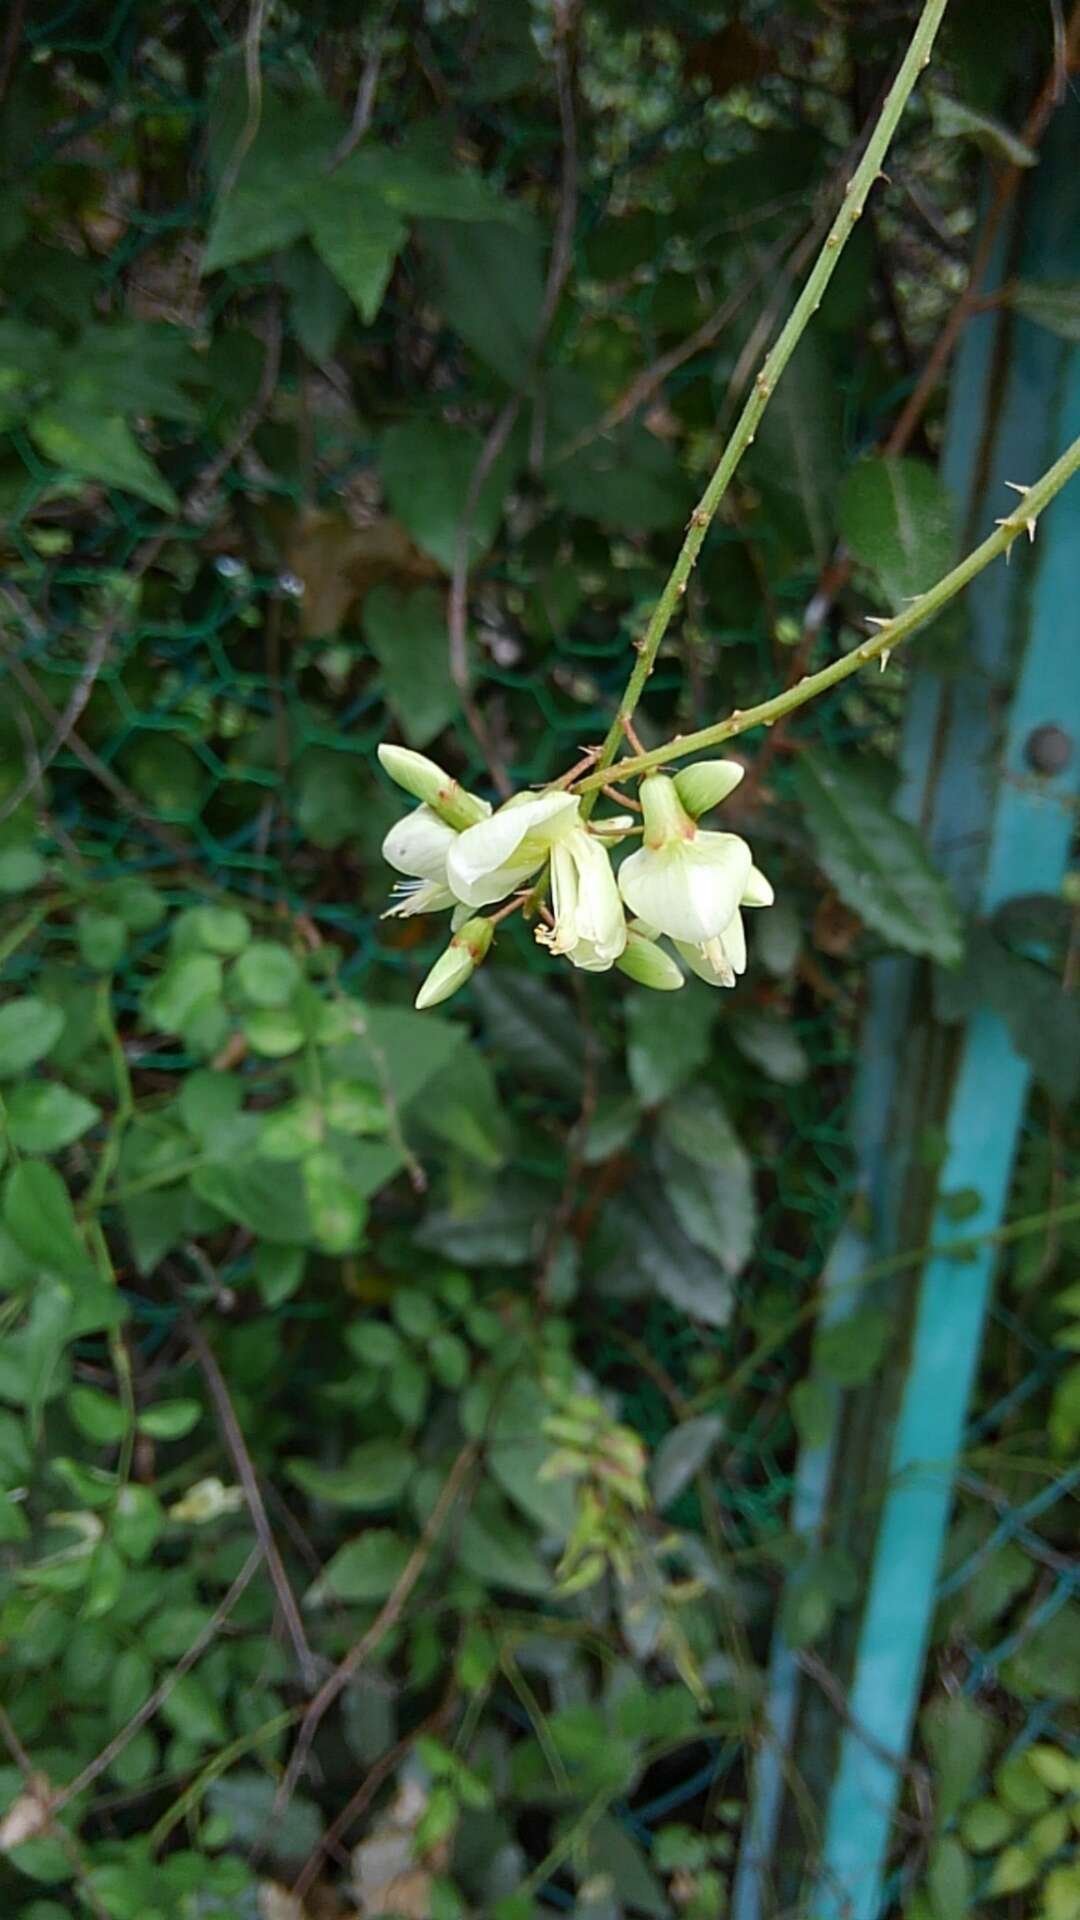 Image of Wisteriopsis japonica